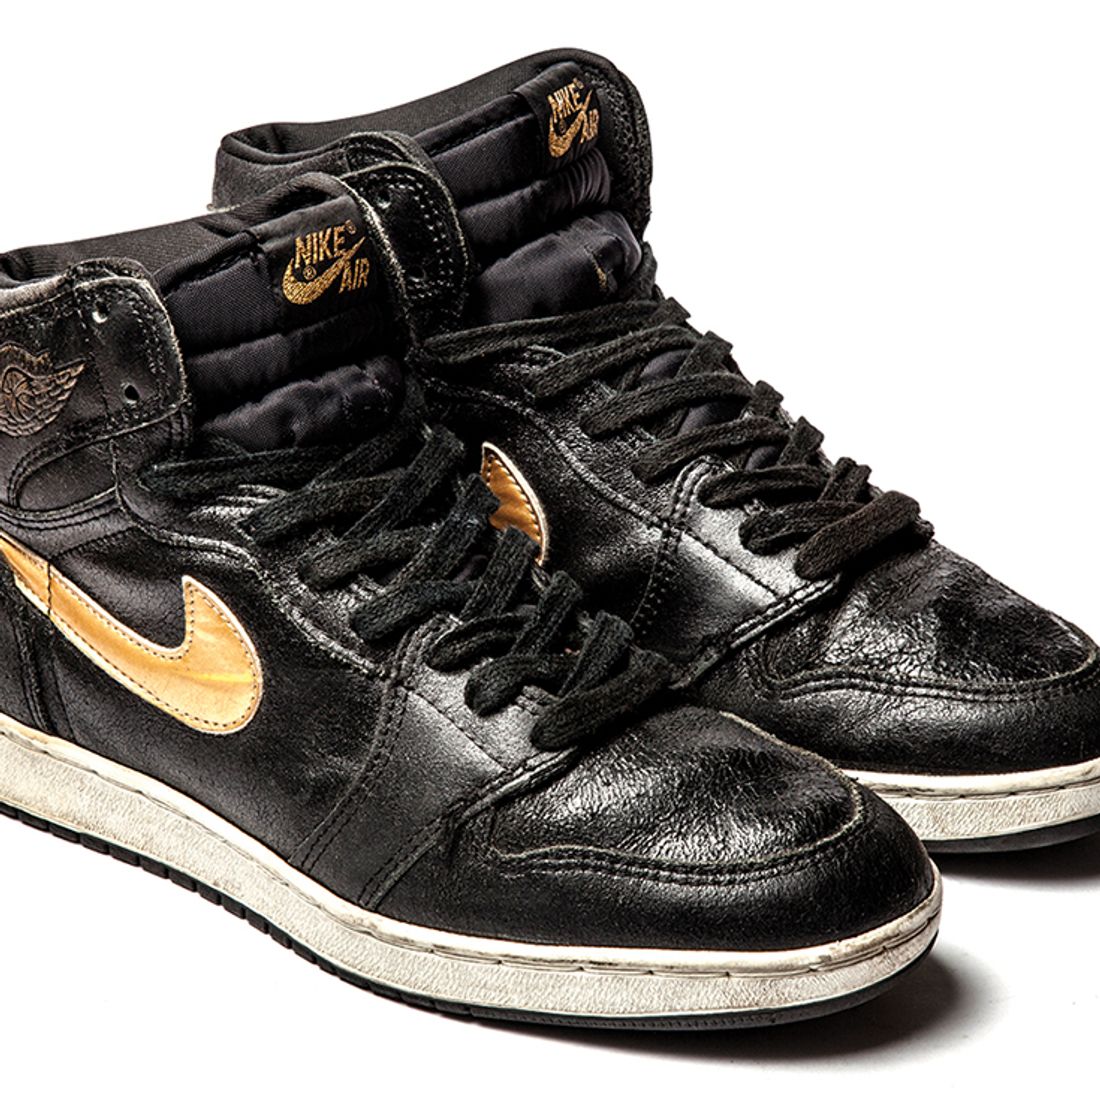 The Holiest Of Grails The Mythical Friends And Family Jordan 1 From Sneaker Freaker